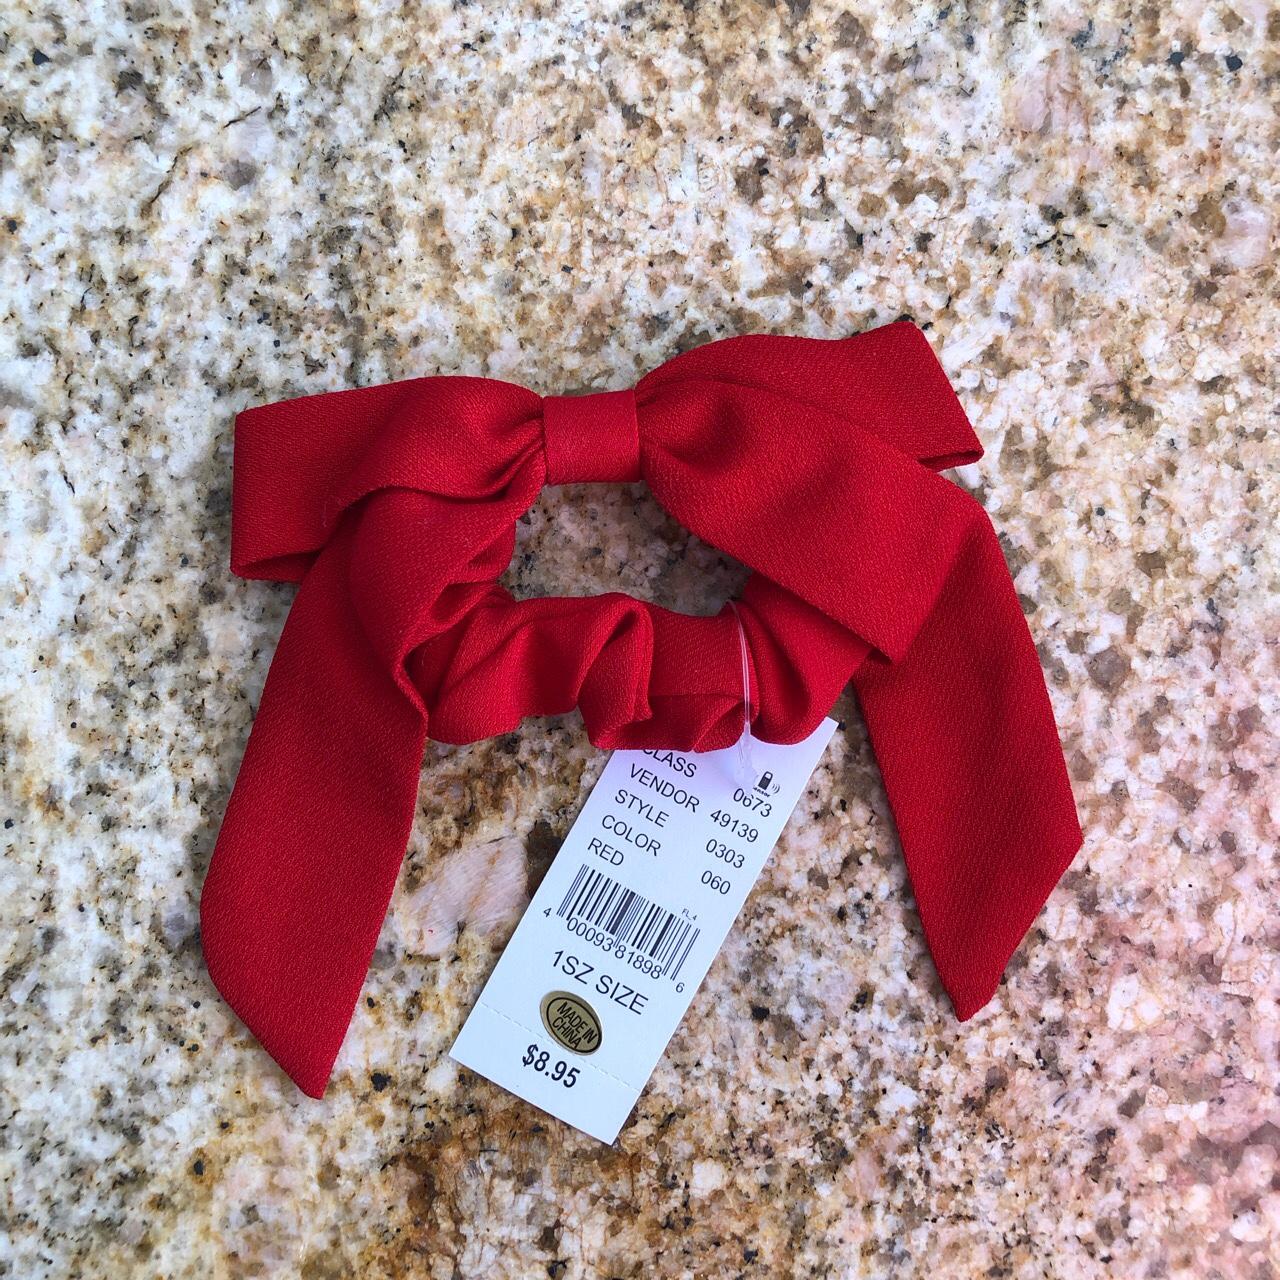 New Pacsun red bow hair tie 🎀 the perfect accessory - Depop